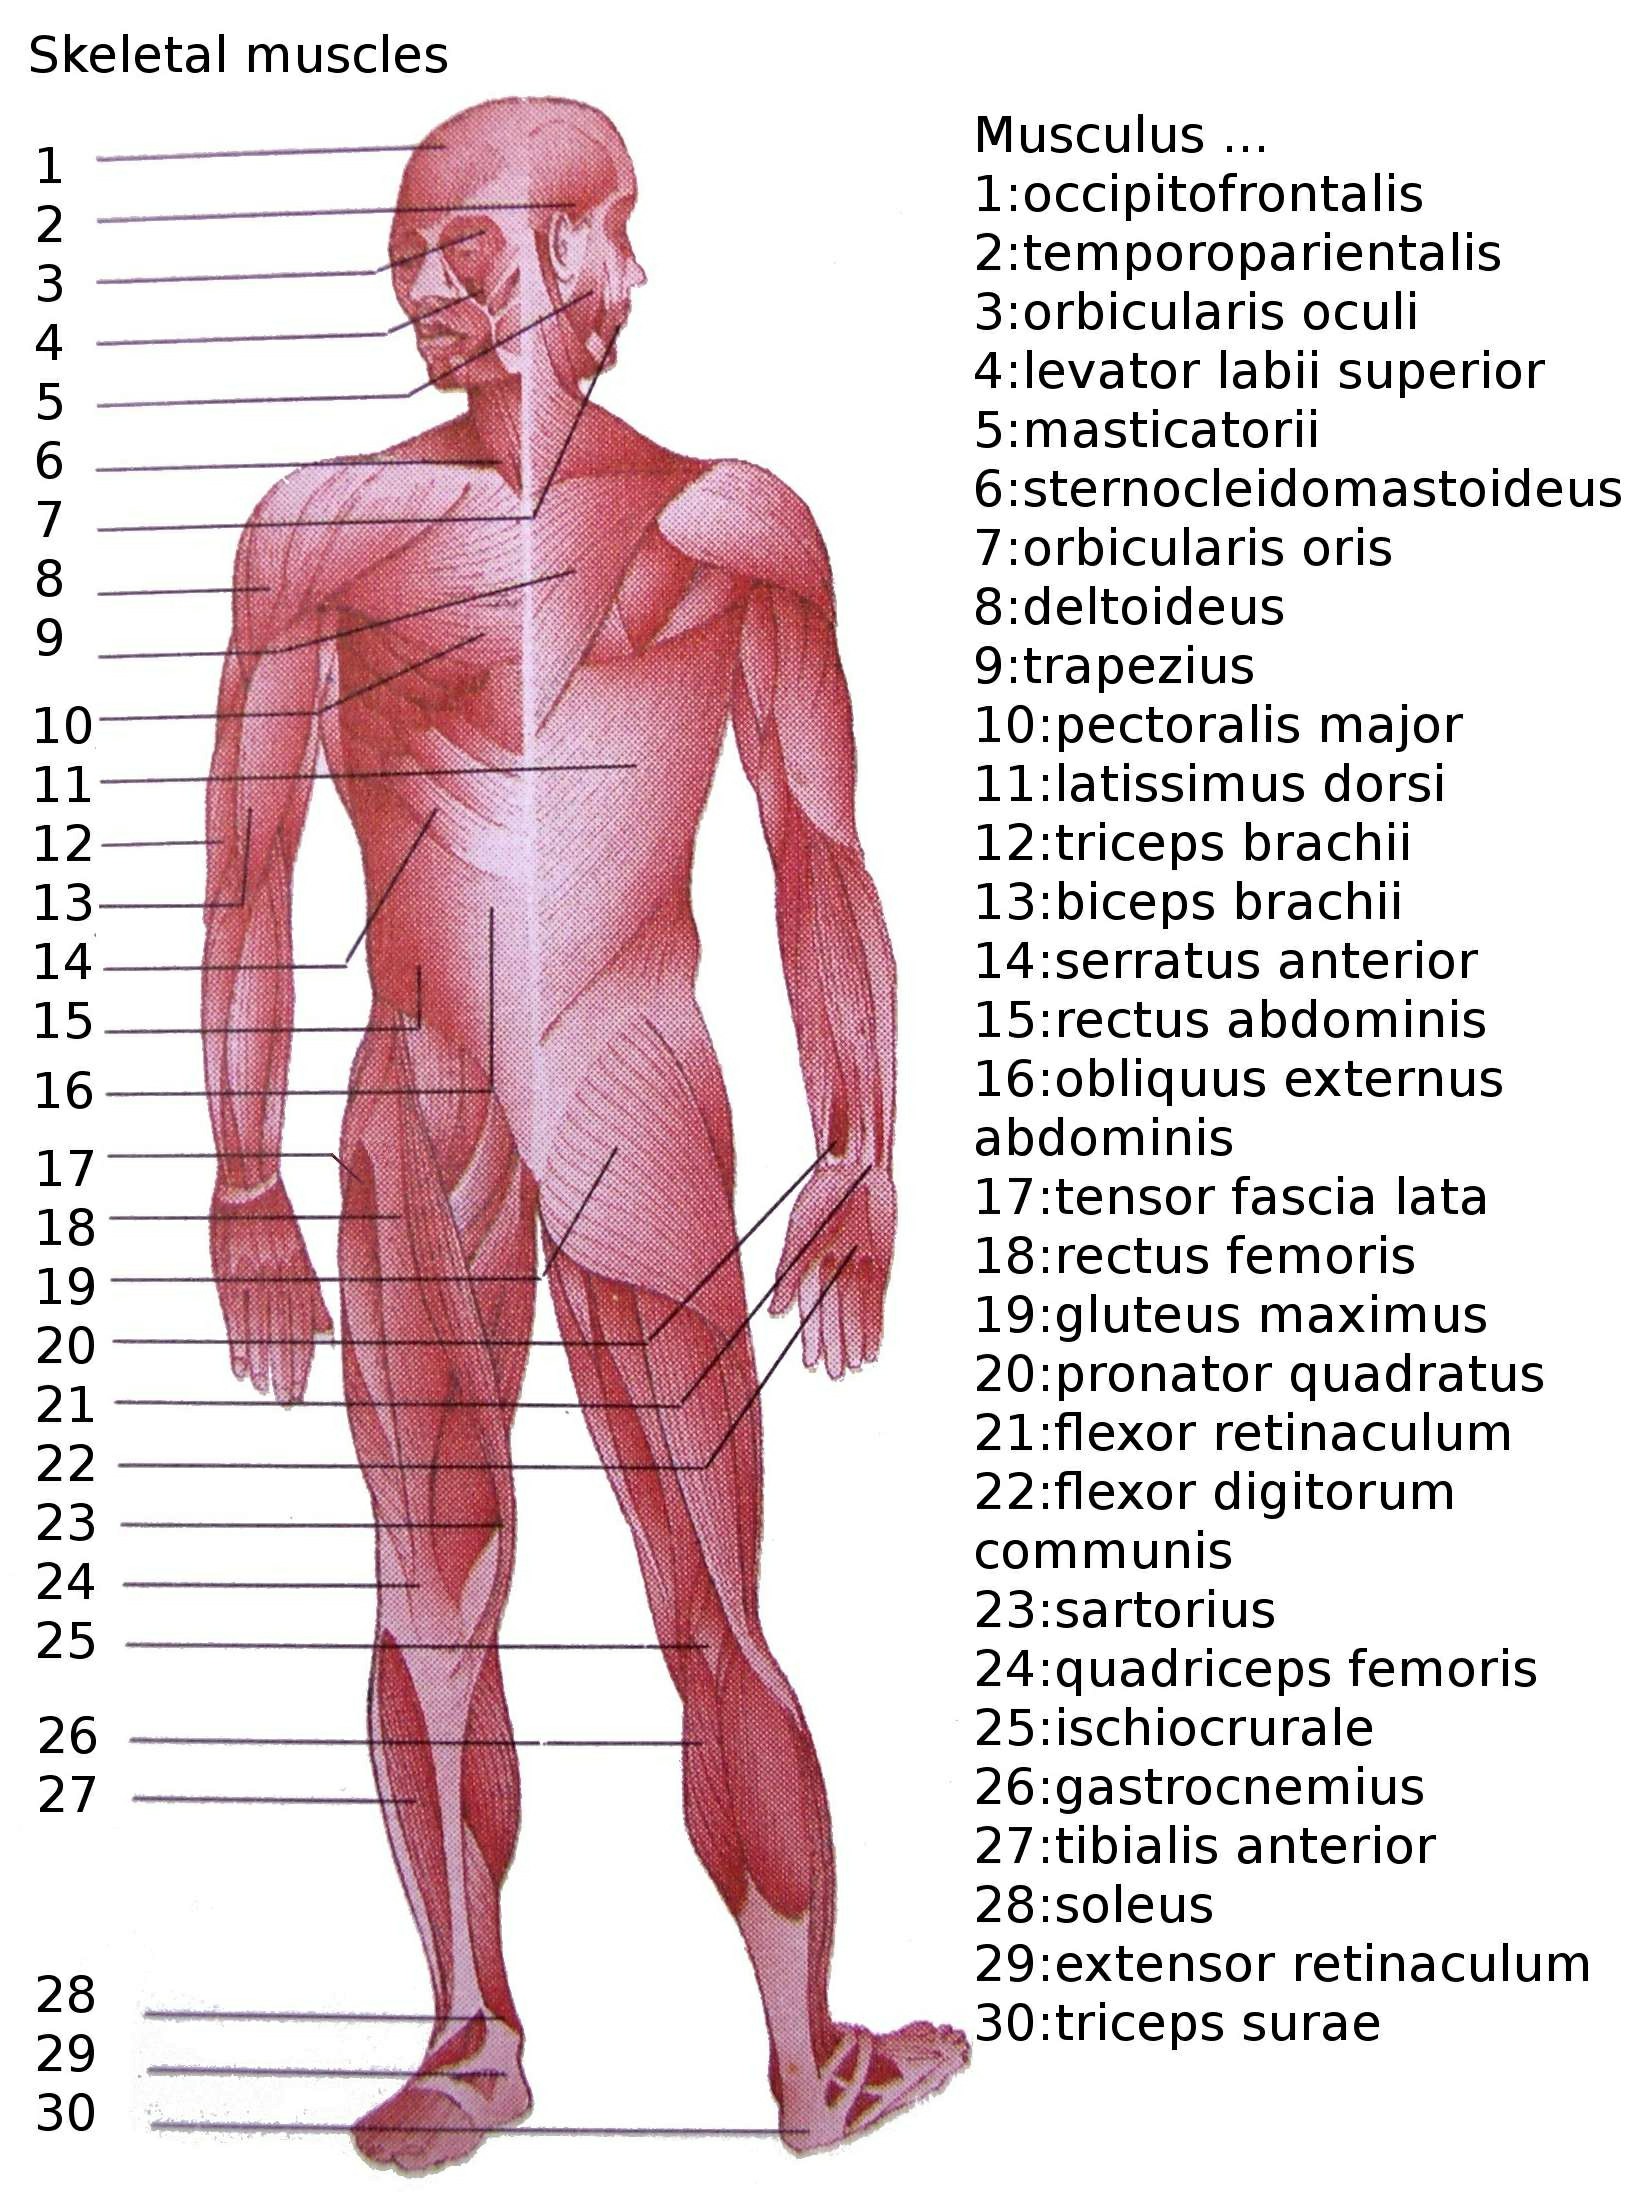 Muscle Images Of Human Body List Of Skeletal Muscles Of The Human Body   Wikipedia